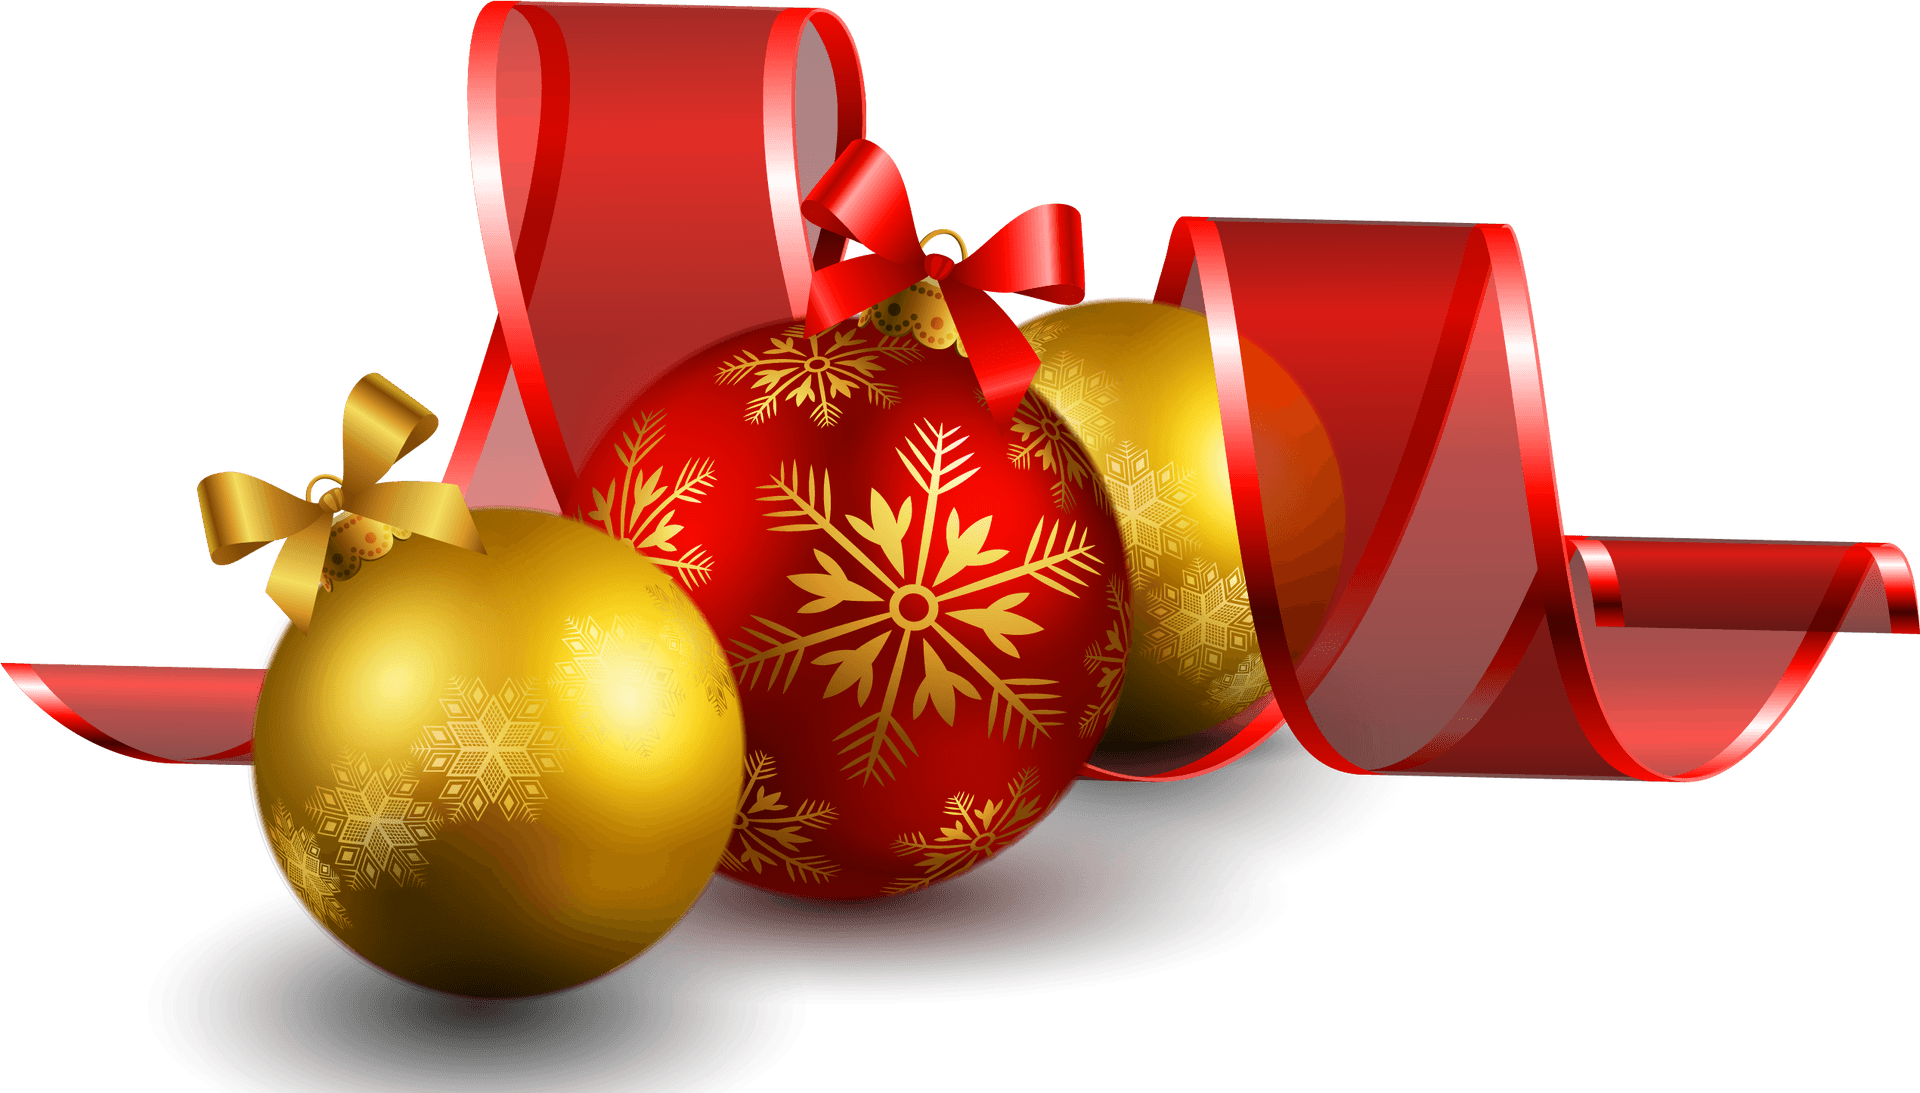 Festive Christmas Ballswith Red Ribbon PNG image